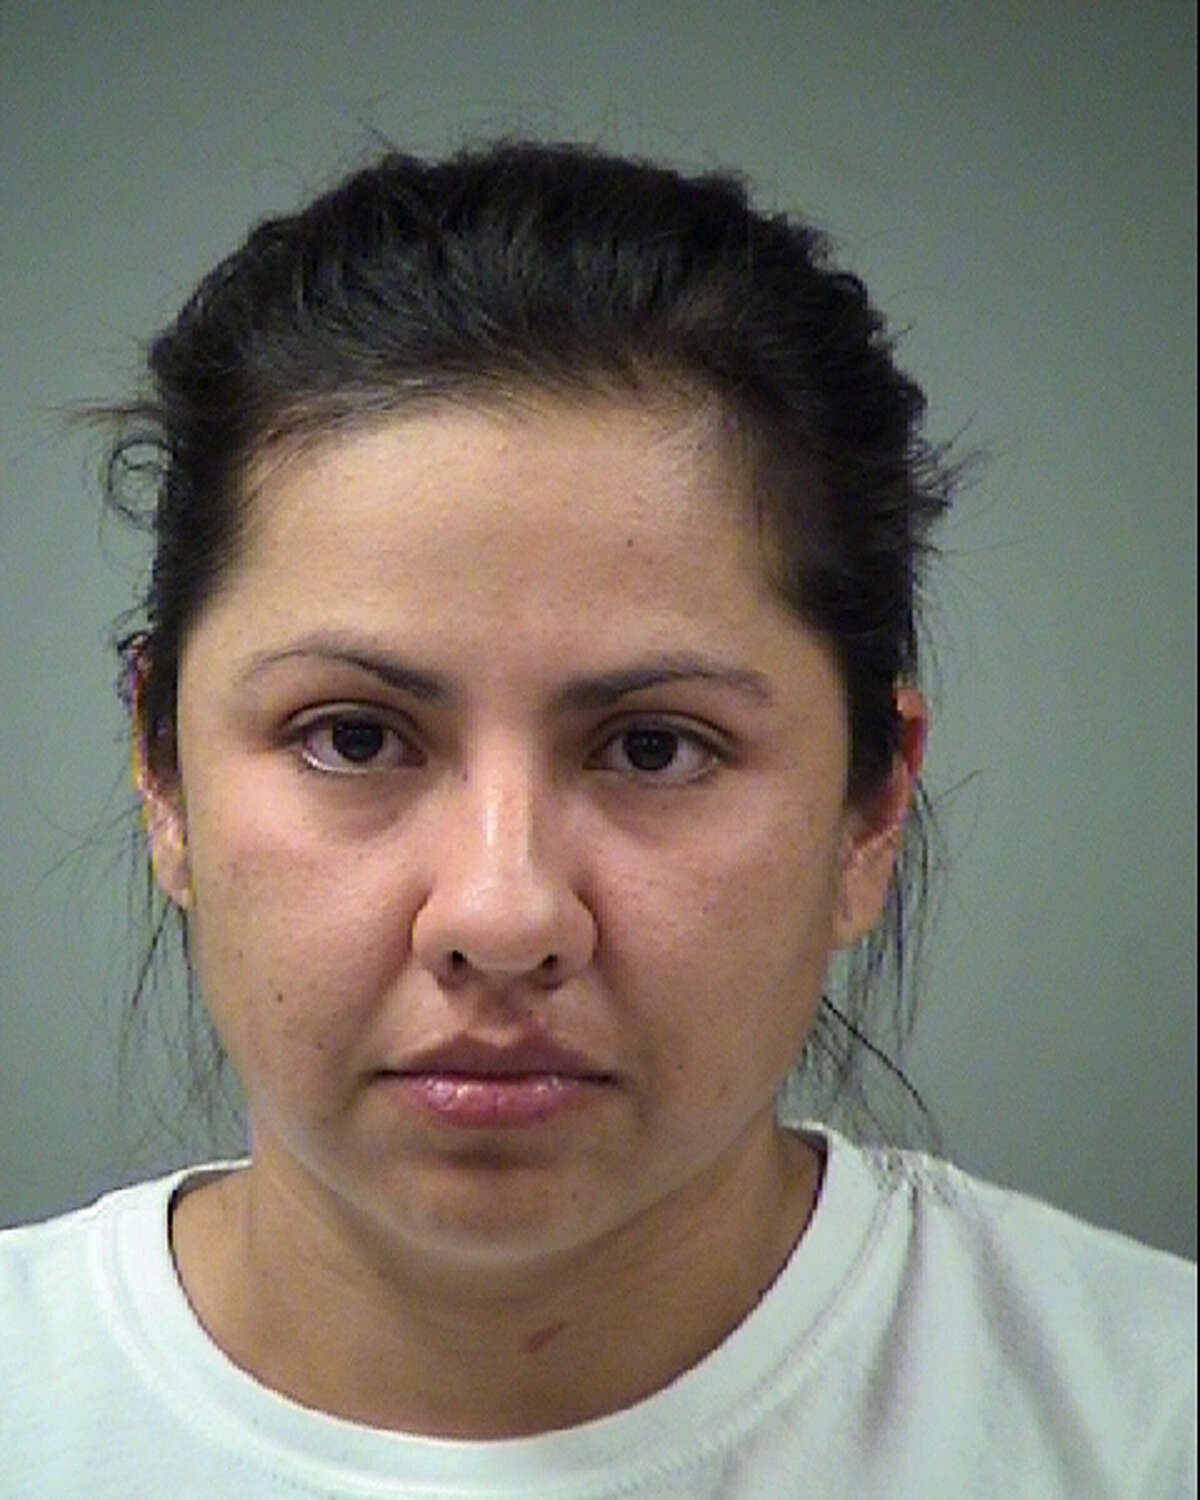 Krystal Borrego, 32, now faces a charge of driving while intoxicated. She was booked into the Bexar County Jail on a $1,000 bond.